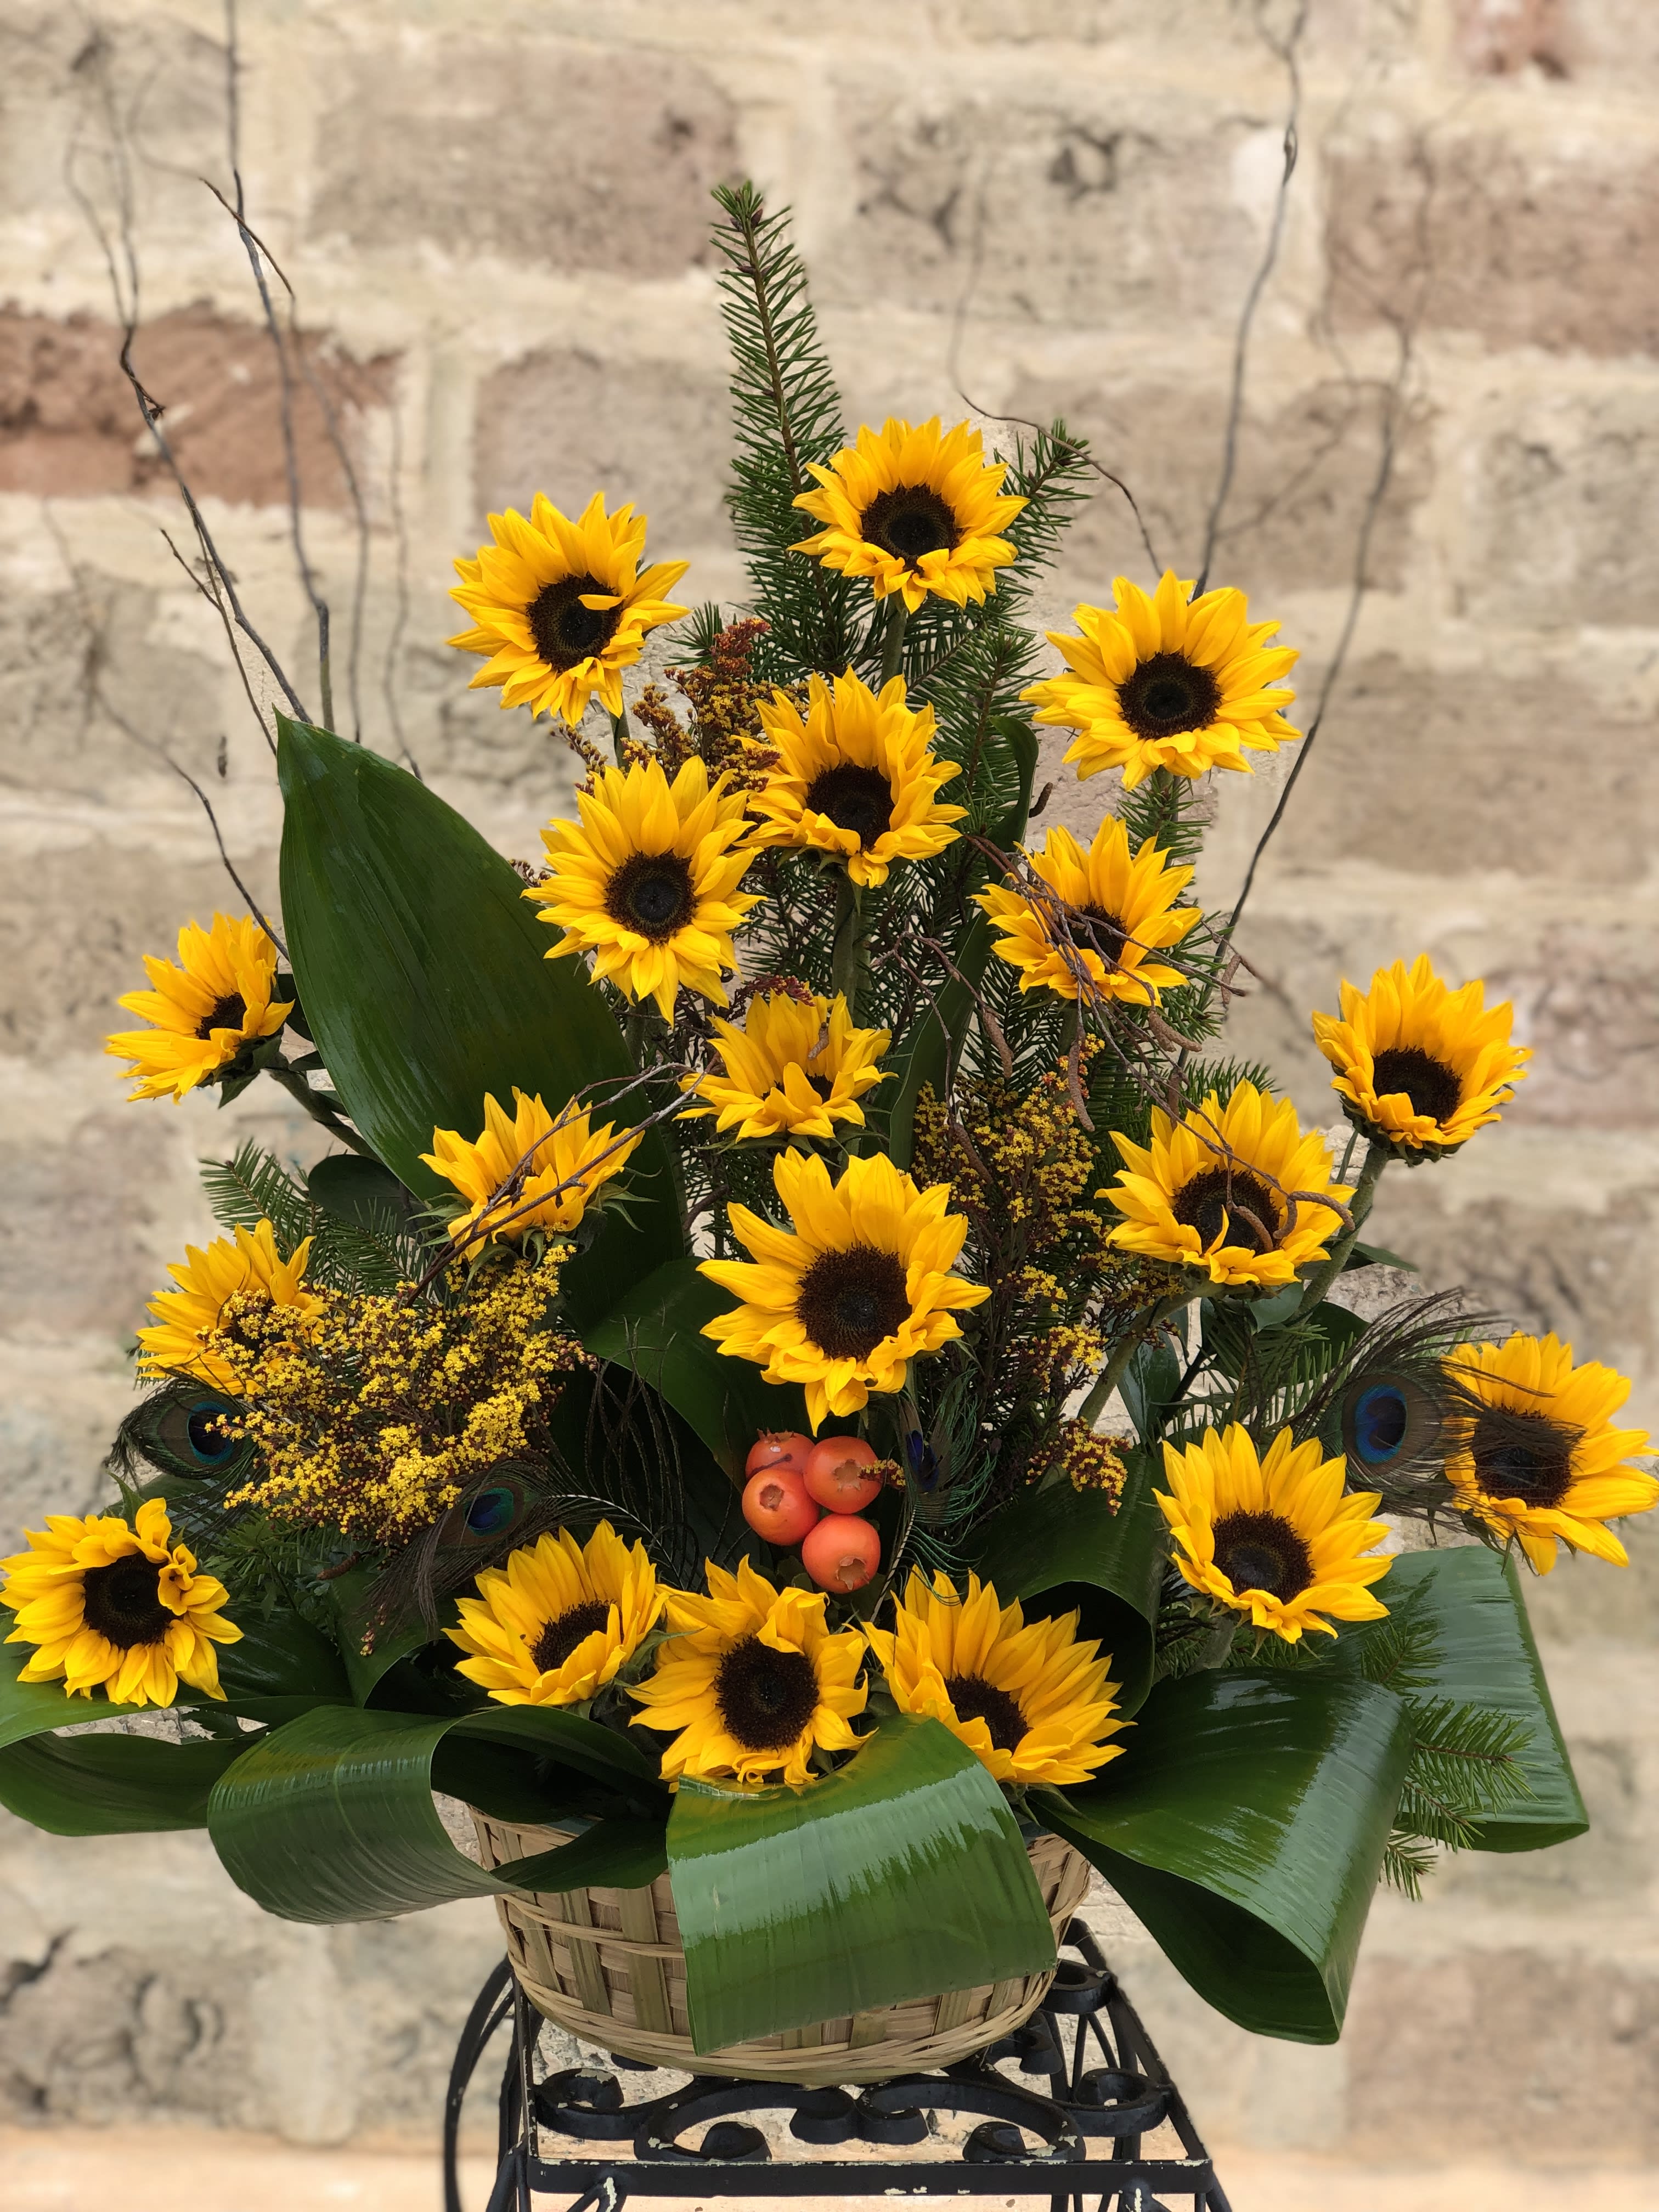 Sunflower Silk Tribute Moultrie Florist: Flowers By Barrett - Local Flower  Delivery Moultrie, GA 31768